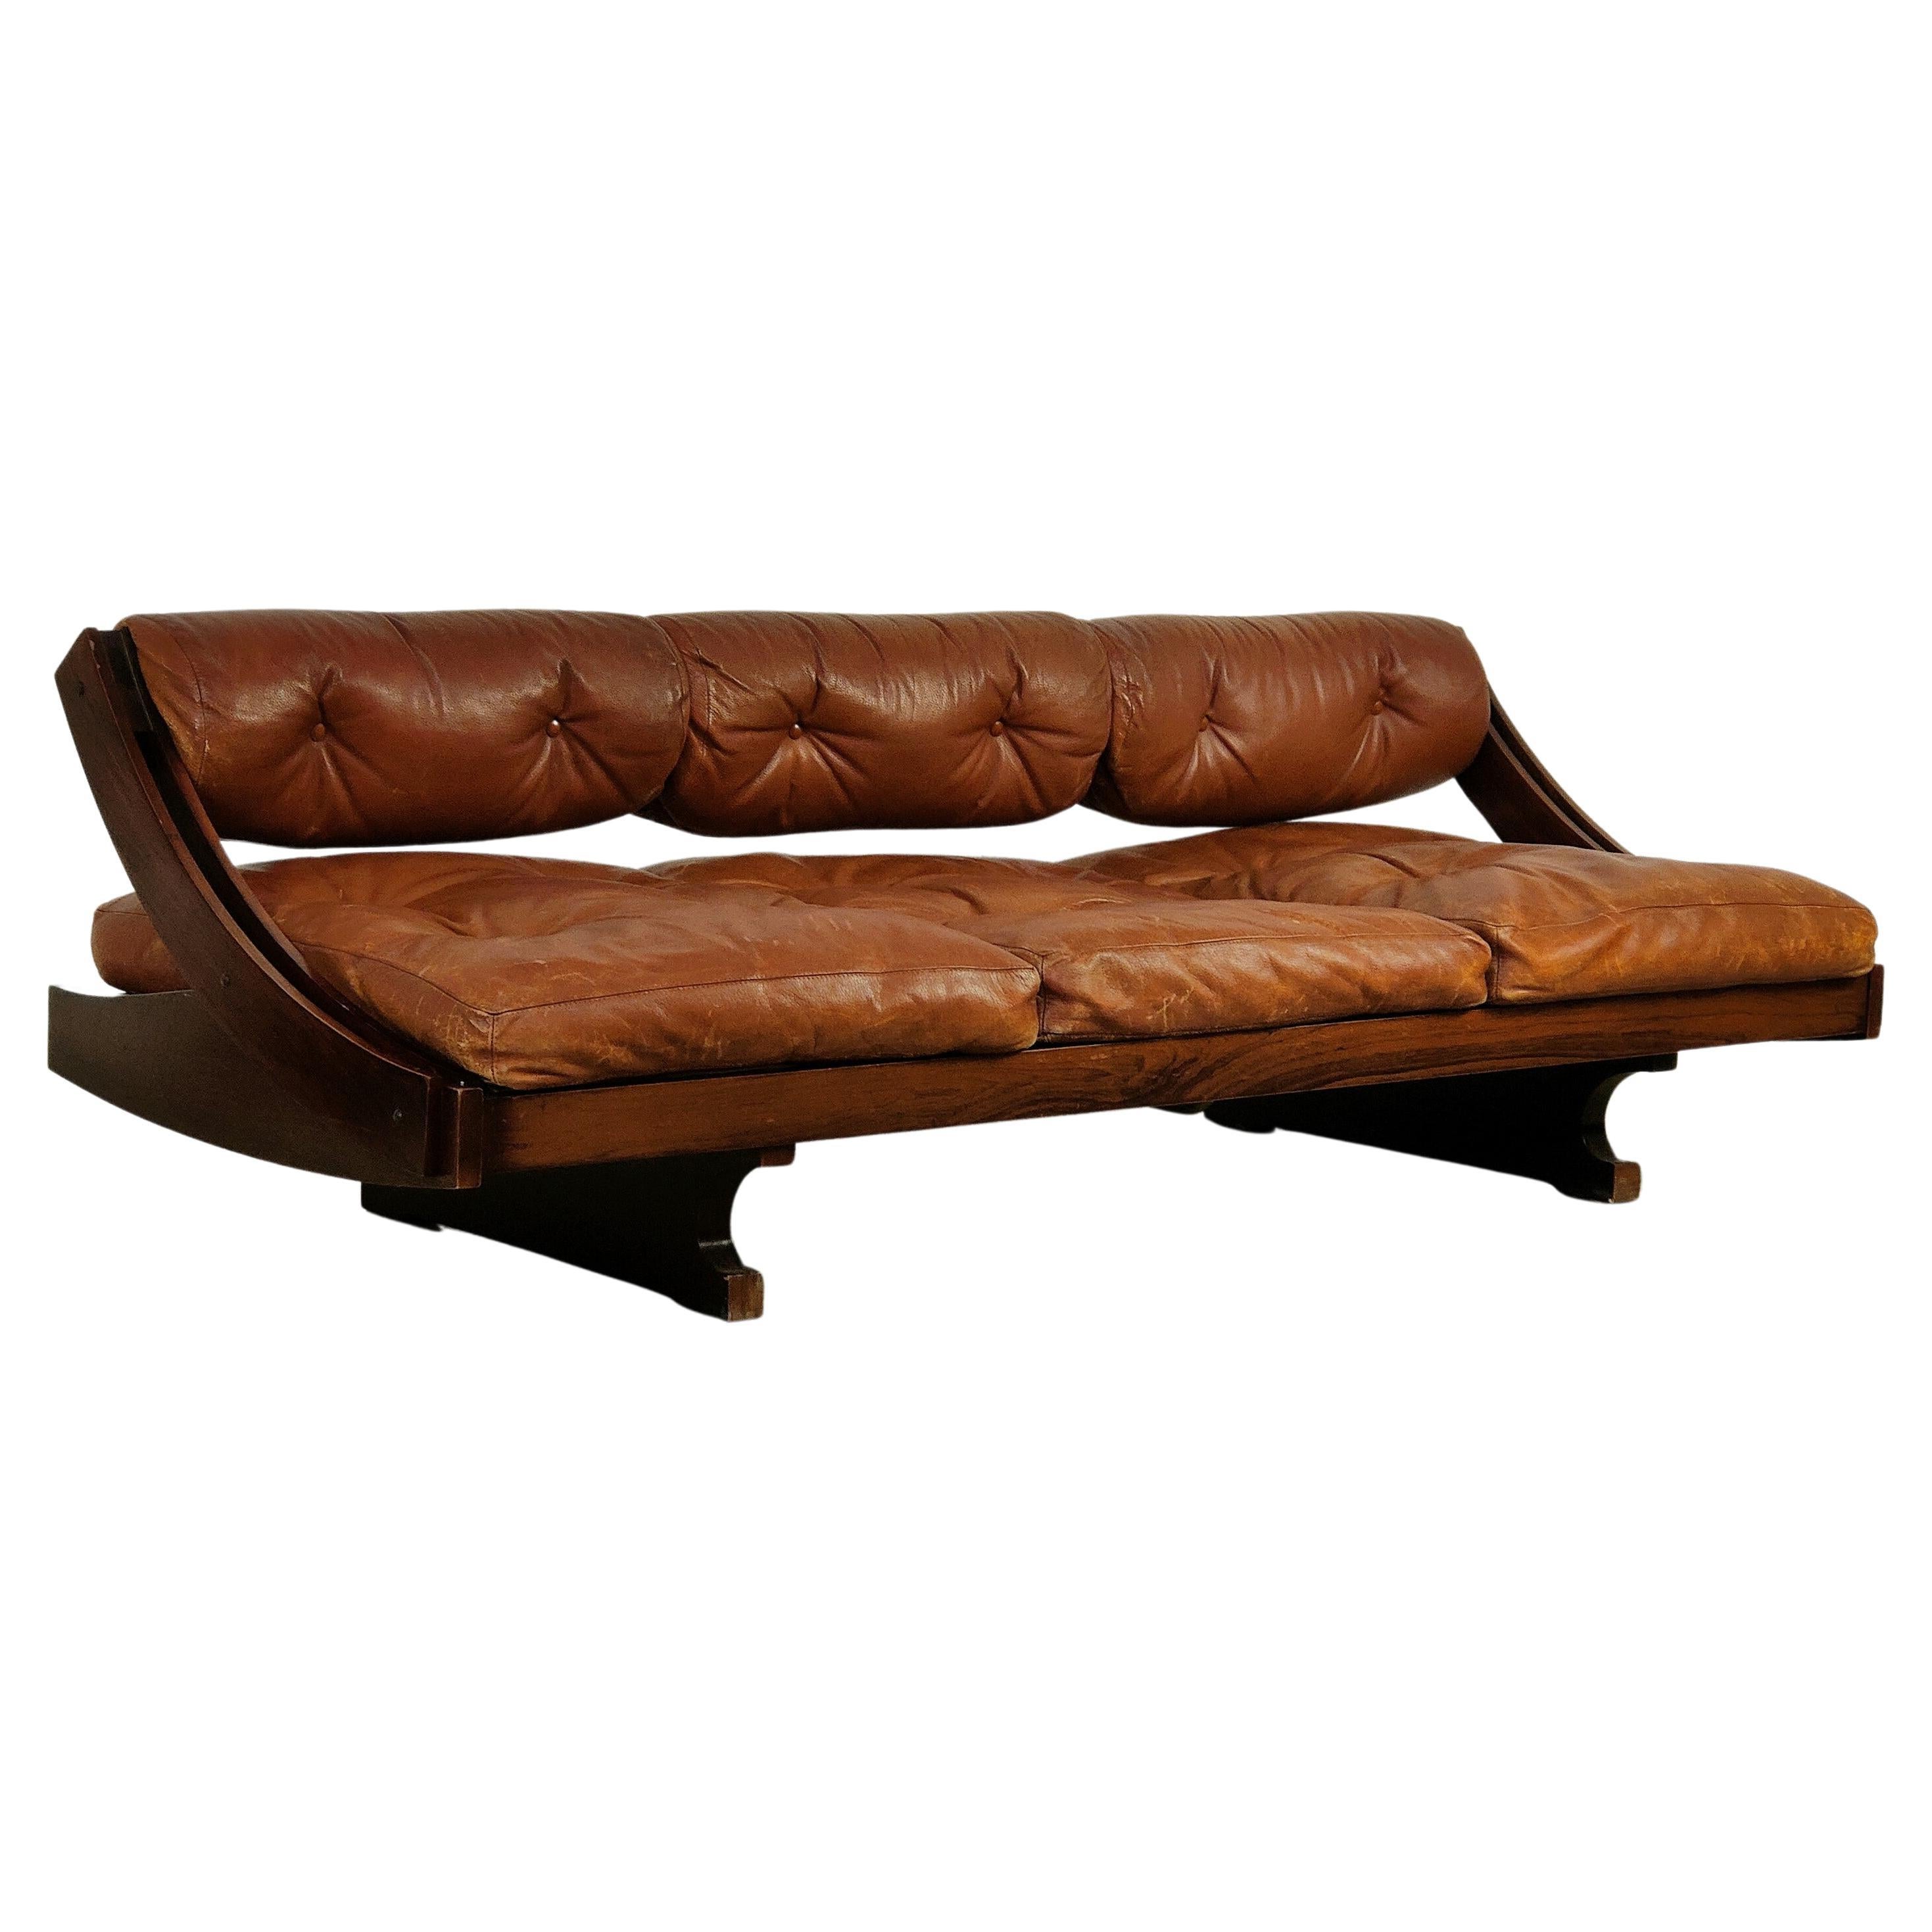 Leather Daybed Sofa GS 195 by Gianni Songia for Sormani 60s